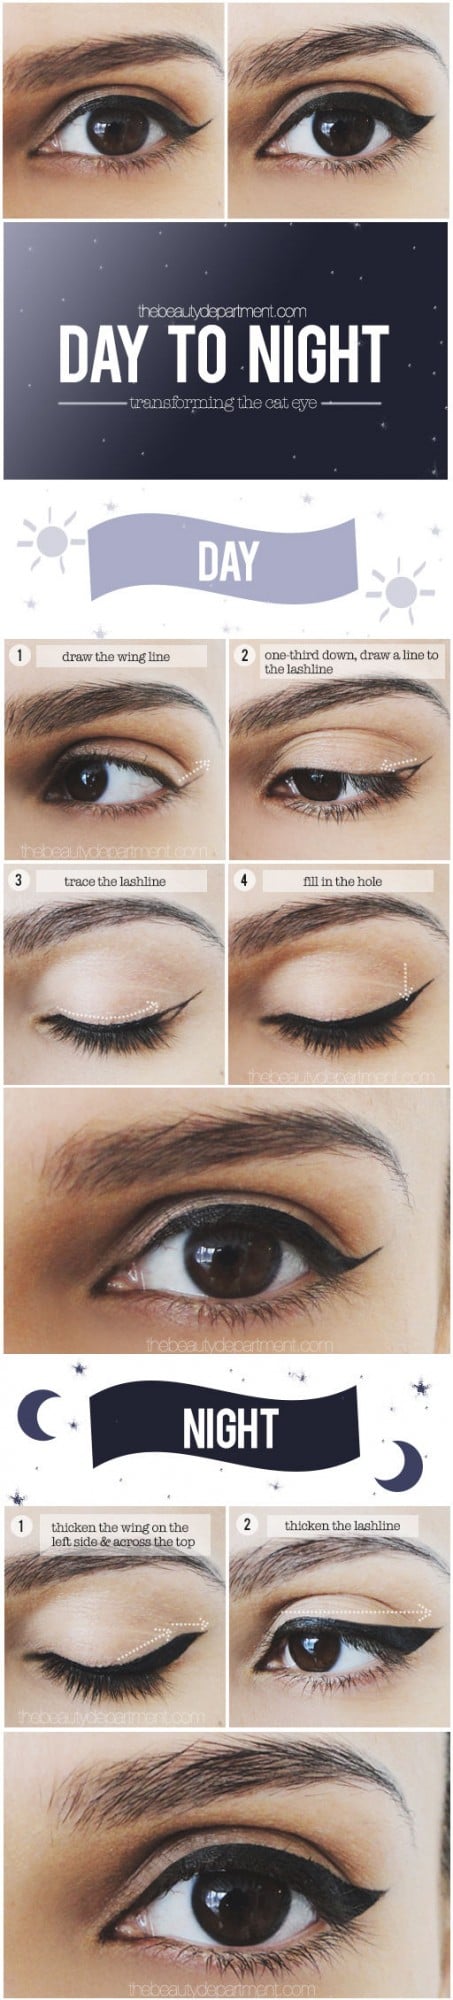 16 Makeup Tricks For Flawless Look Every Woman Should Know (6)